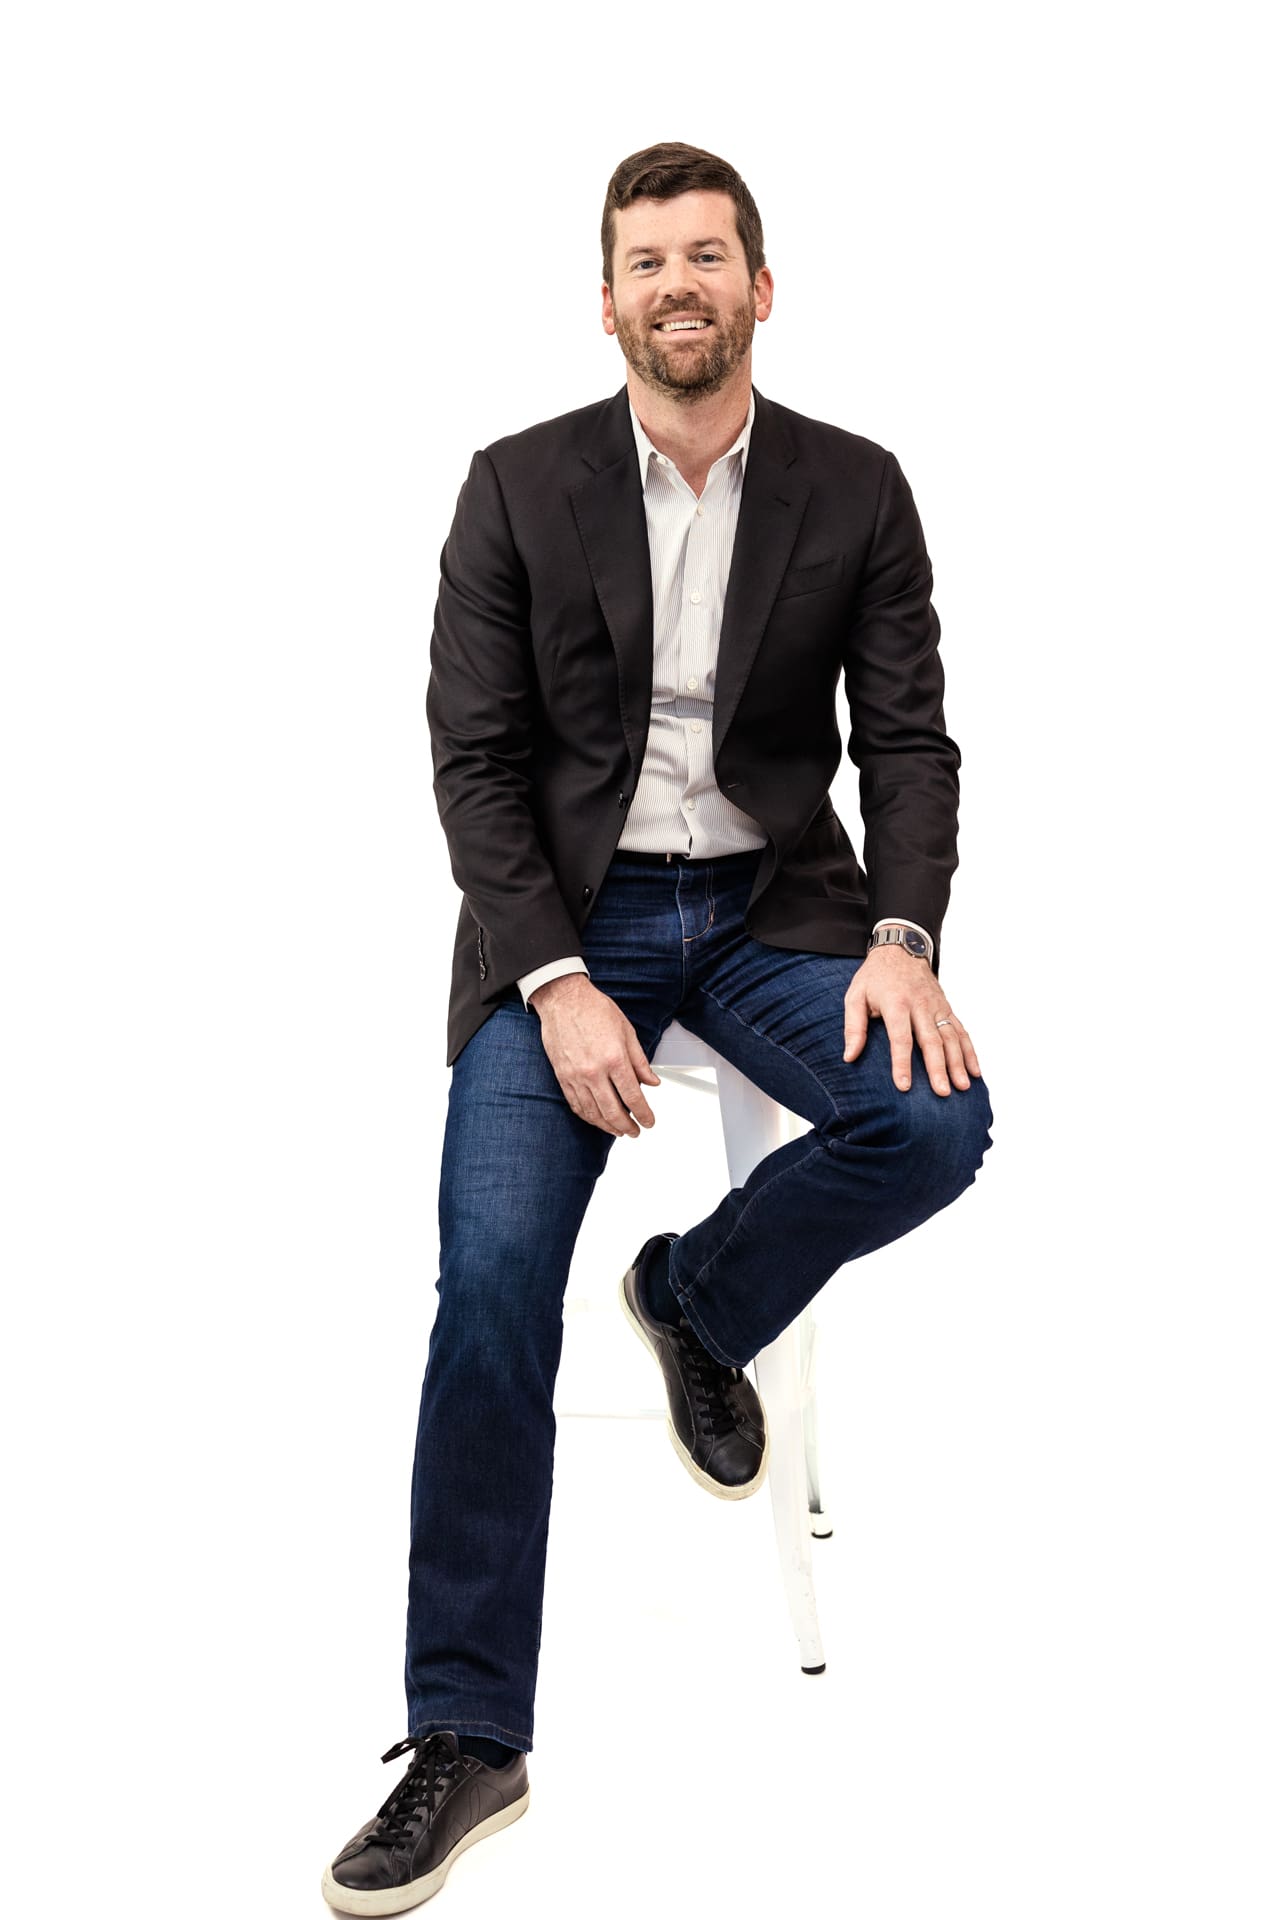 Studio portrait of man wearing suit jacket and dark denim pants with black sneakers on white backdrop at Chicago photography studio P&M Studio